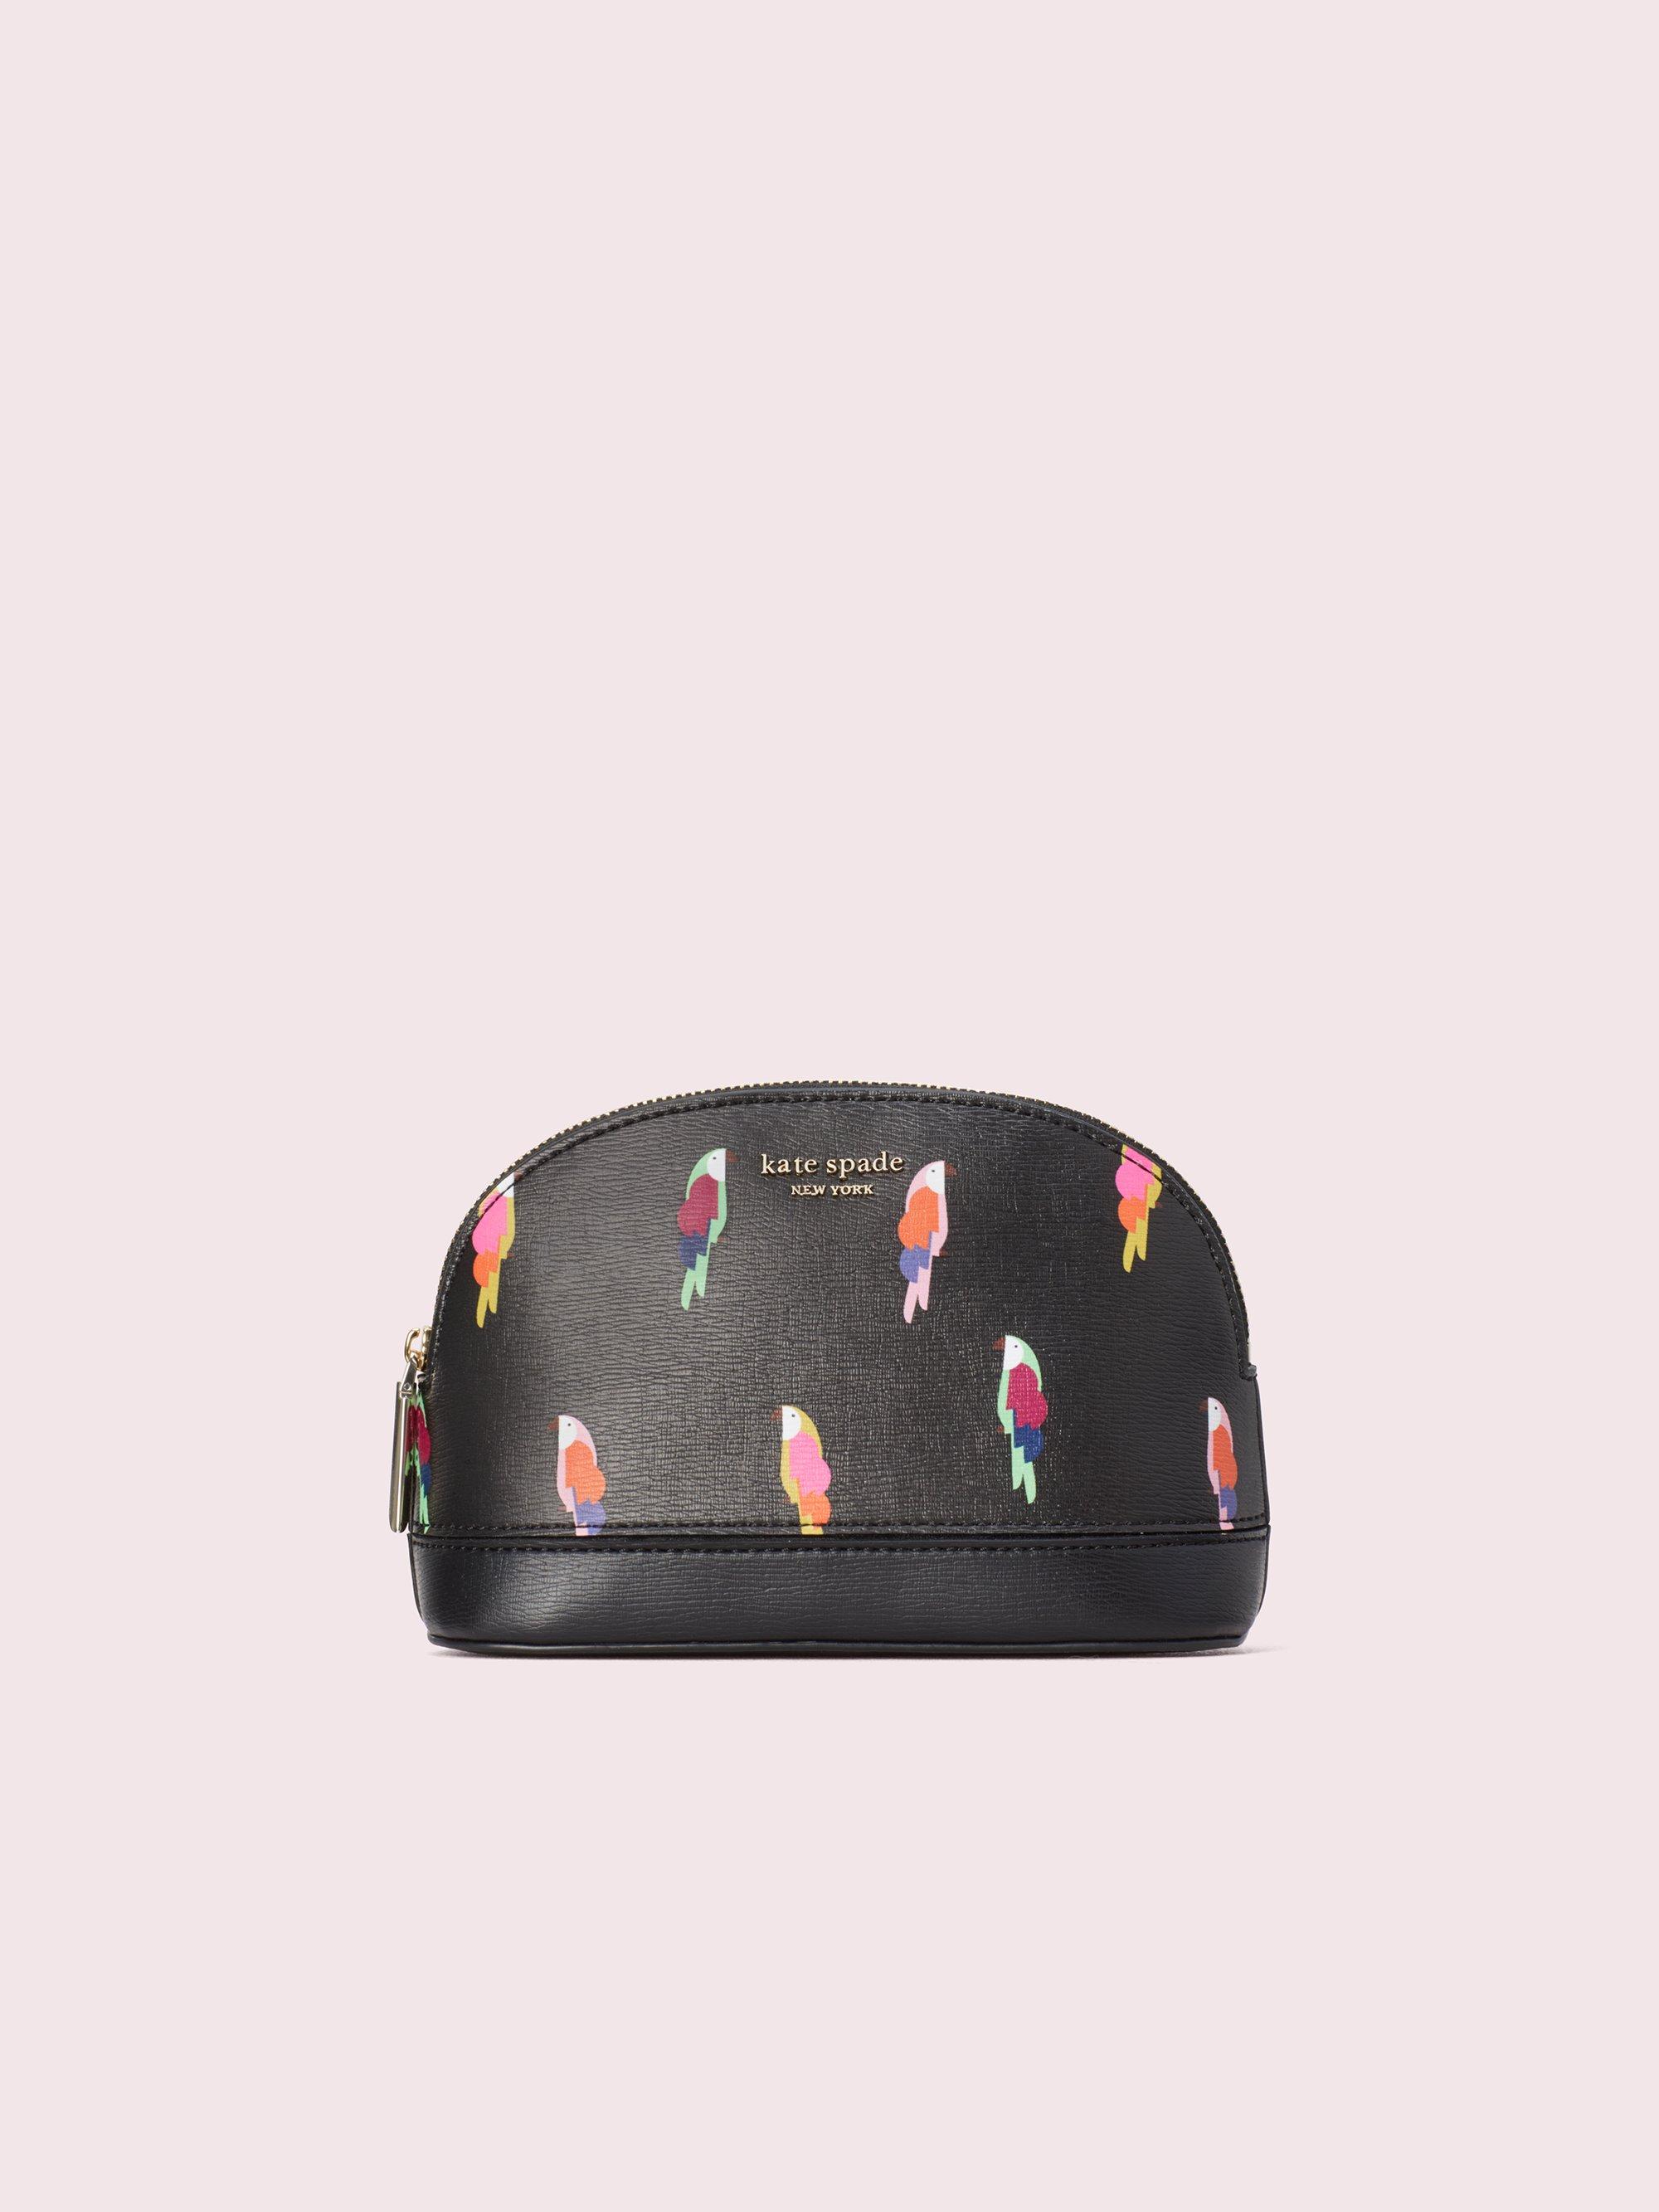 Download Kate Spade Leather Sylvia Flock Party Medium Dome Cosmetic ...